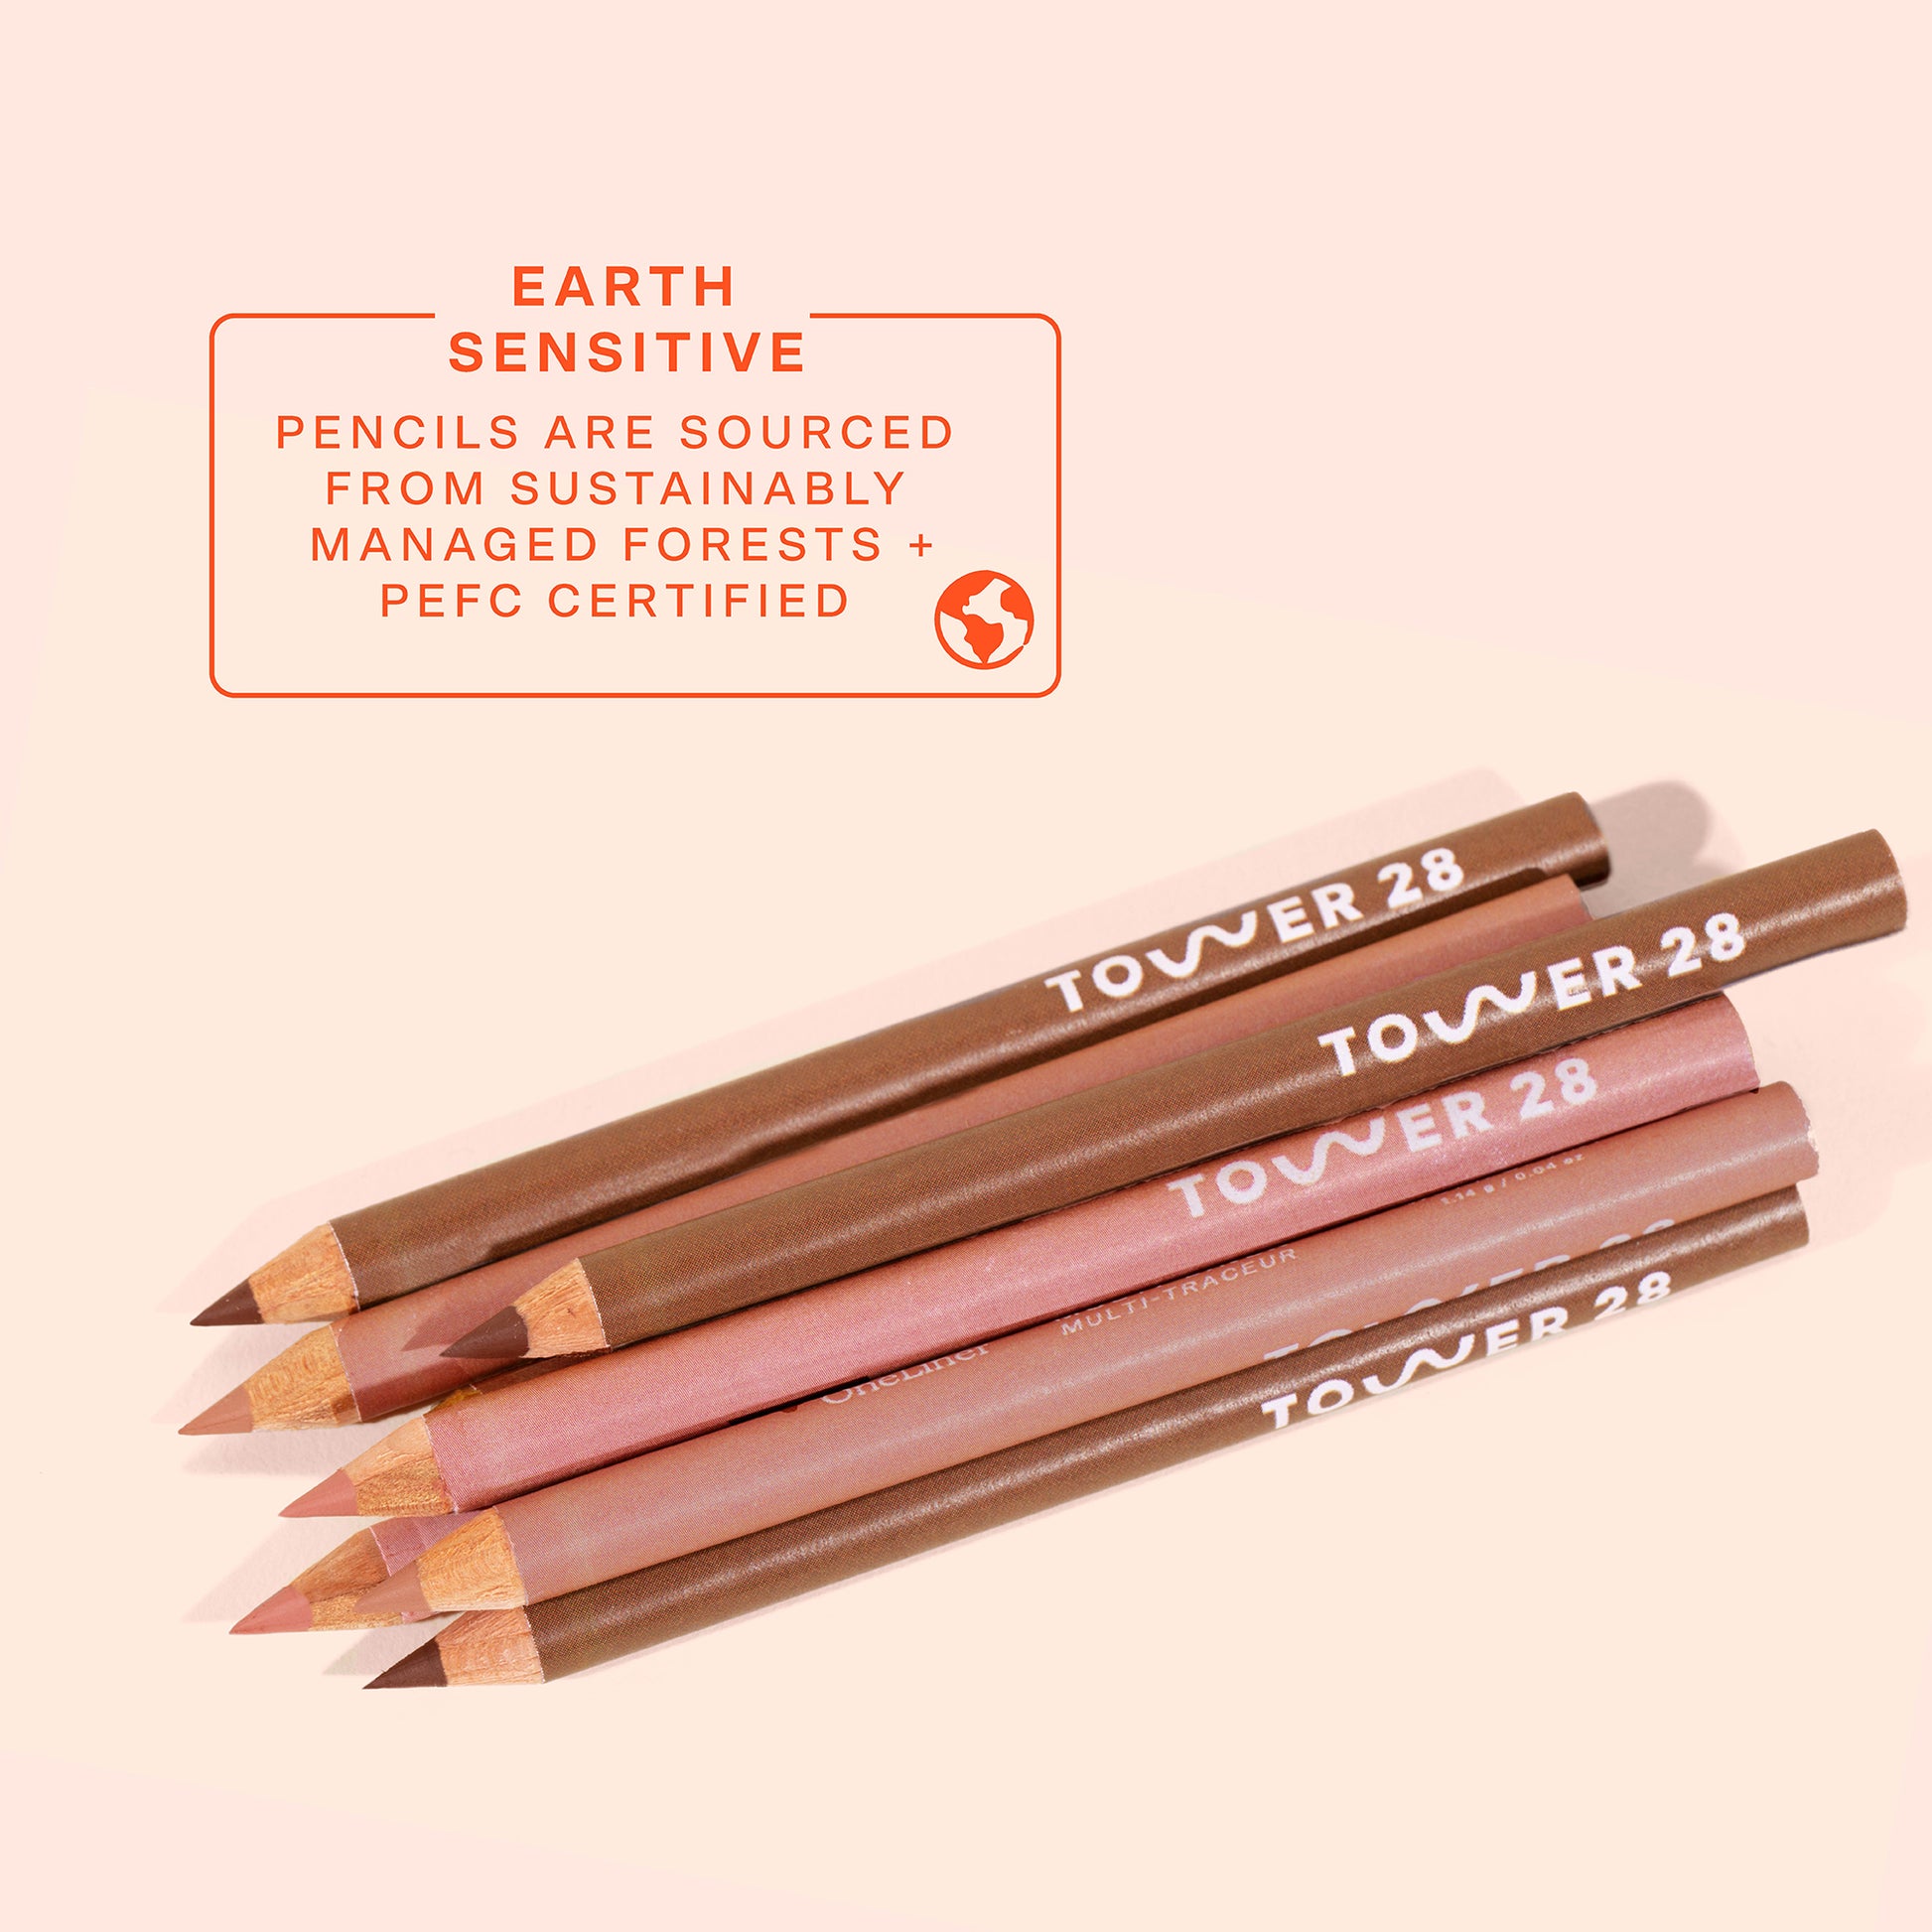 The Tower 28 Beauty OneLiner pencils are sourced from sustainably managed forests and PEFC certified